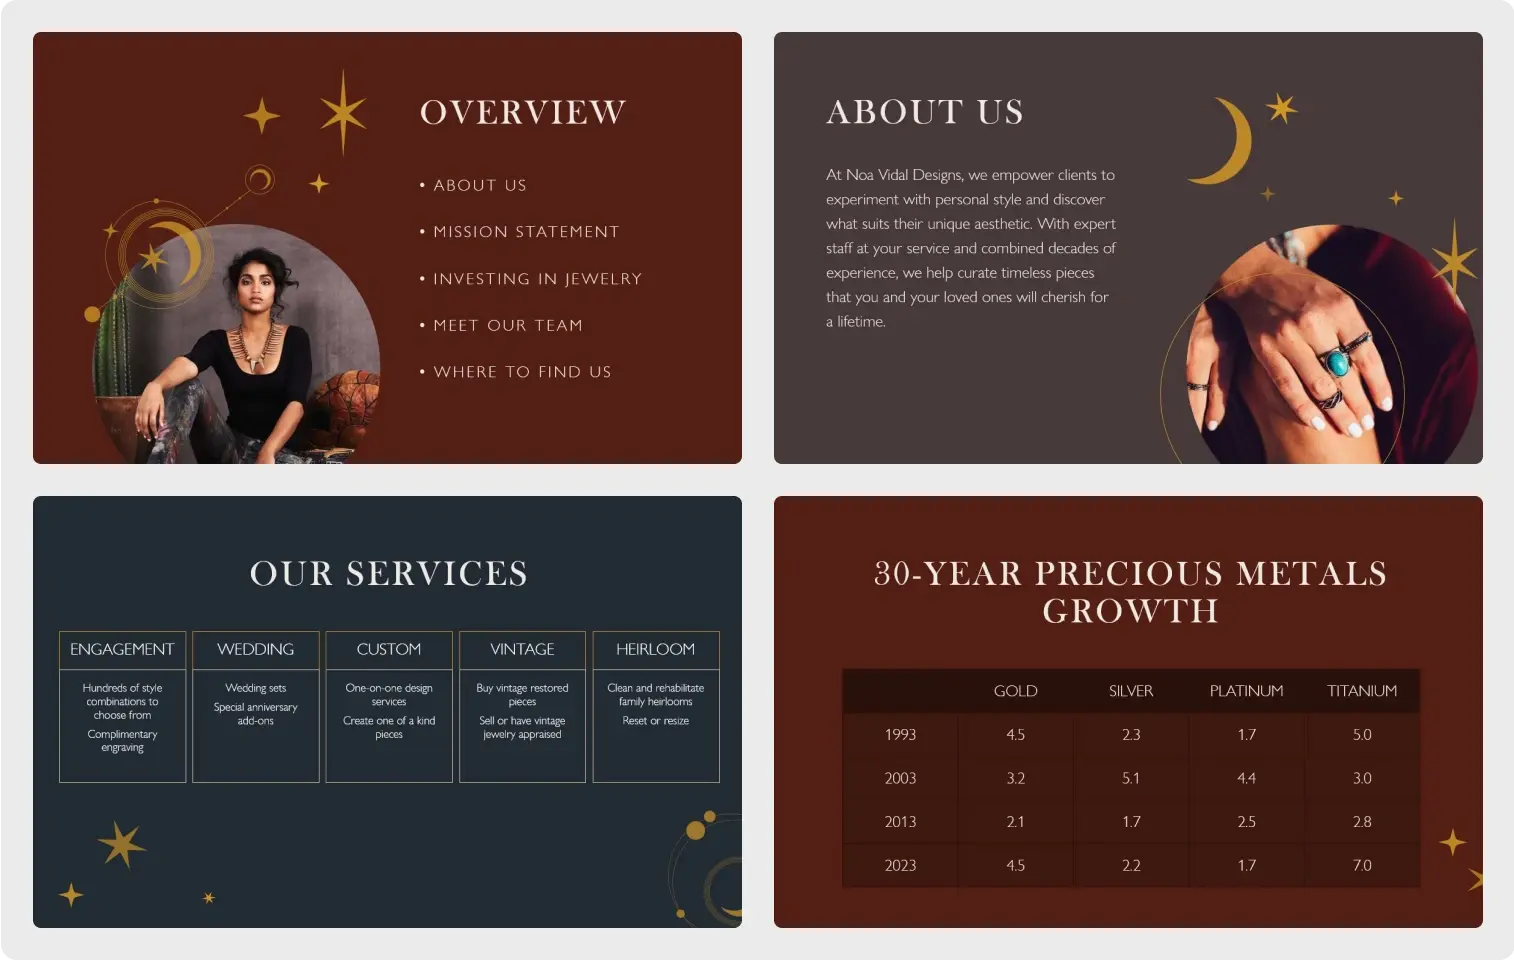 Screenshots of slides in a branded PowerPoint presentation, in hues of navy, maroon, and brown.